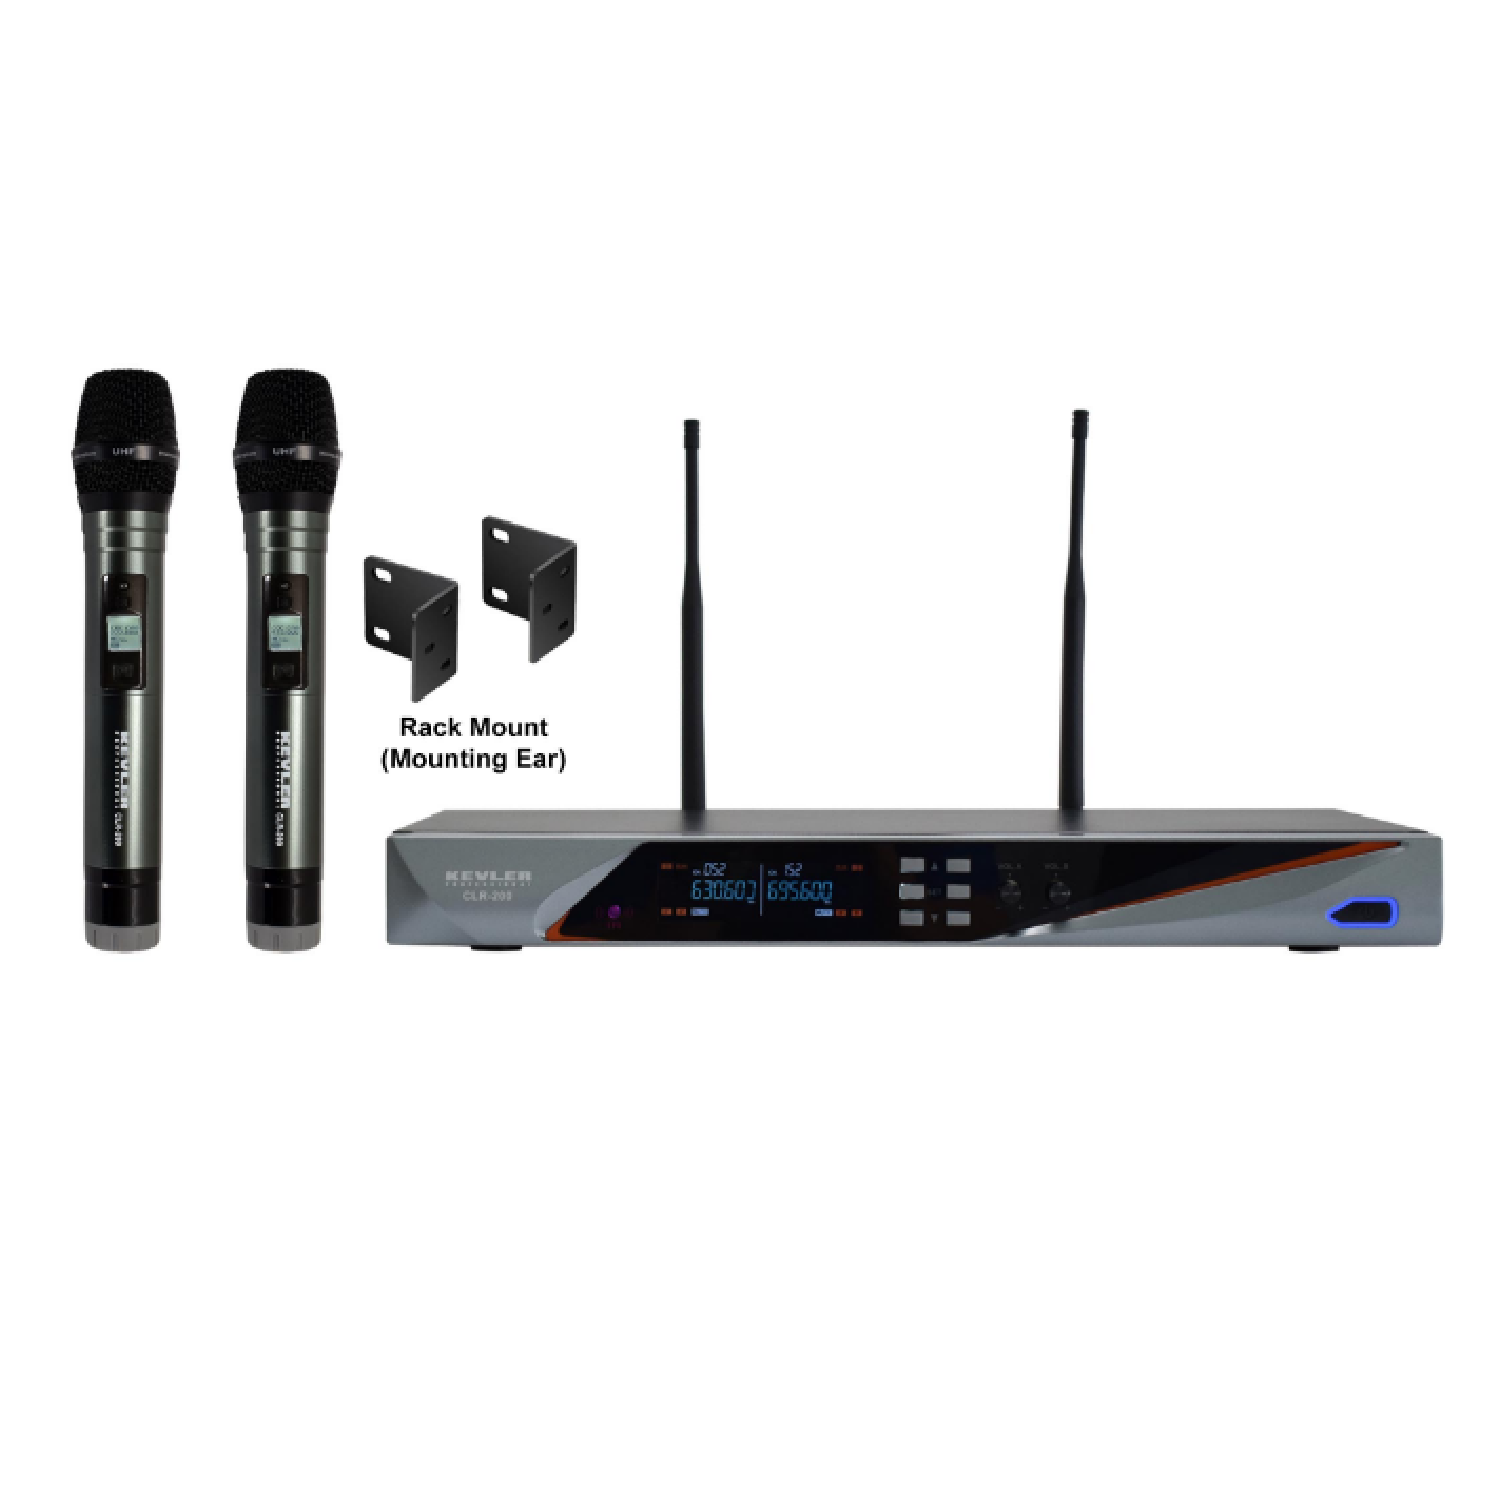 Dual Channel UHF Wireless Handheld Microphone with 200 Selectable Frequencies 600 - 724 MHz   CLR200 kevler